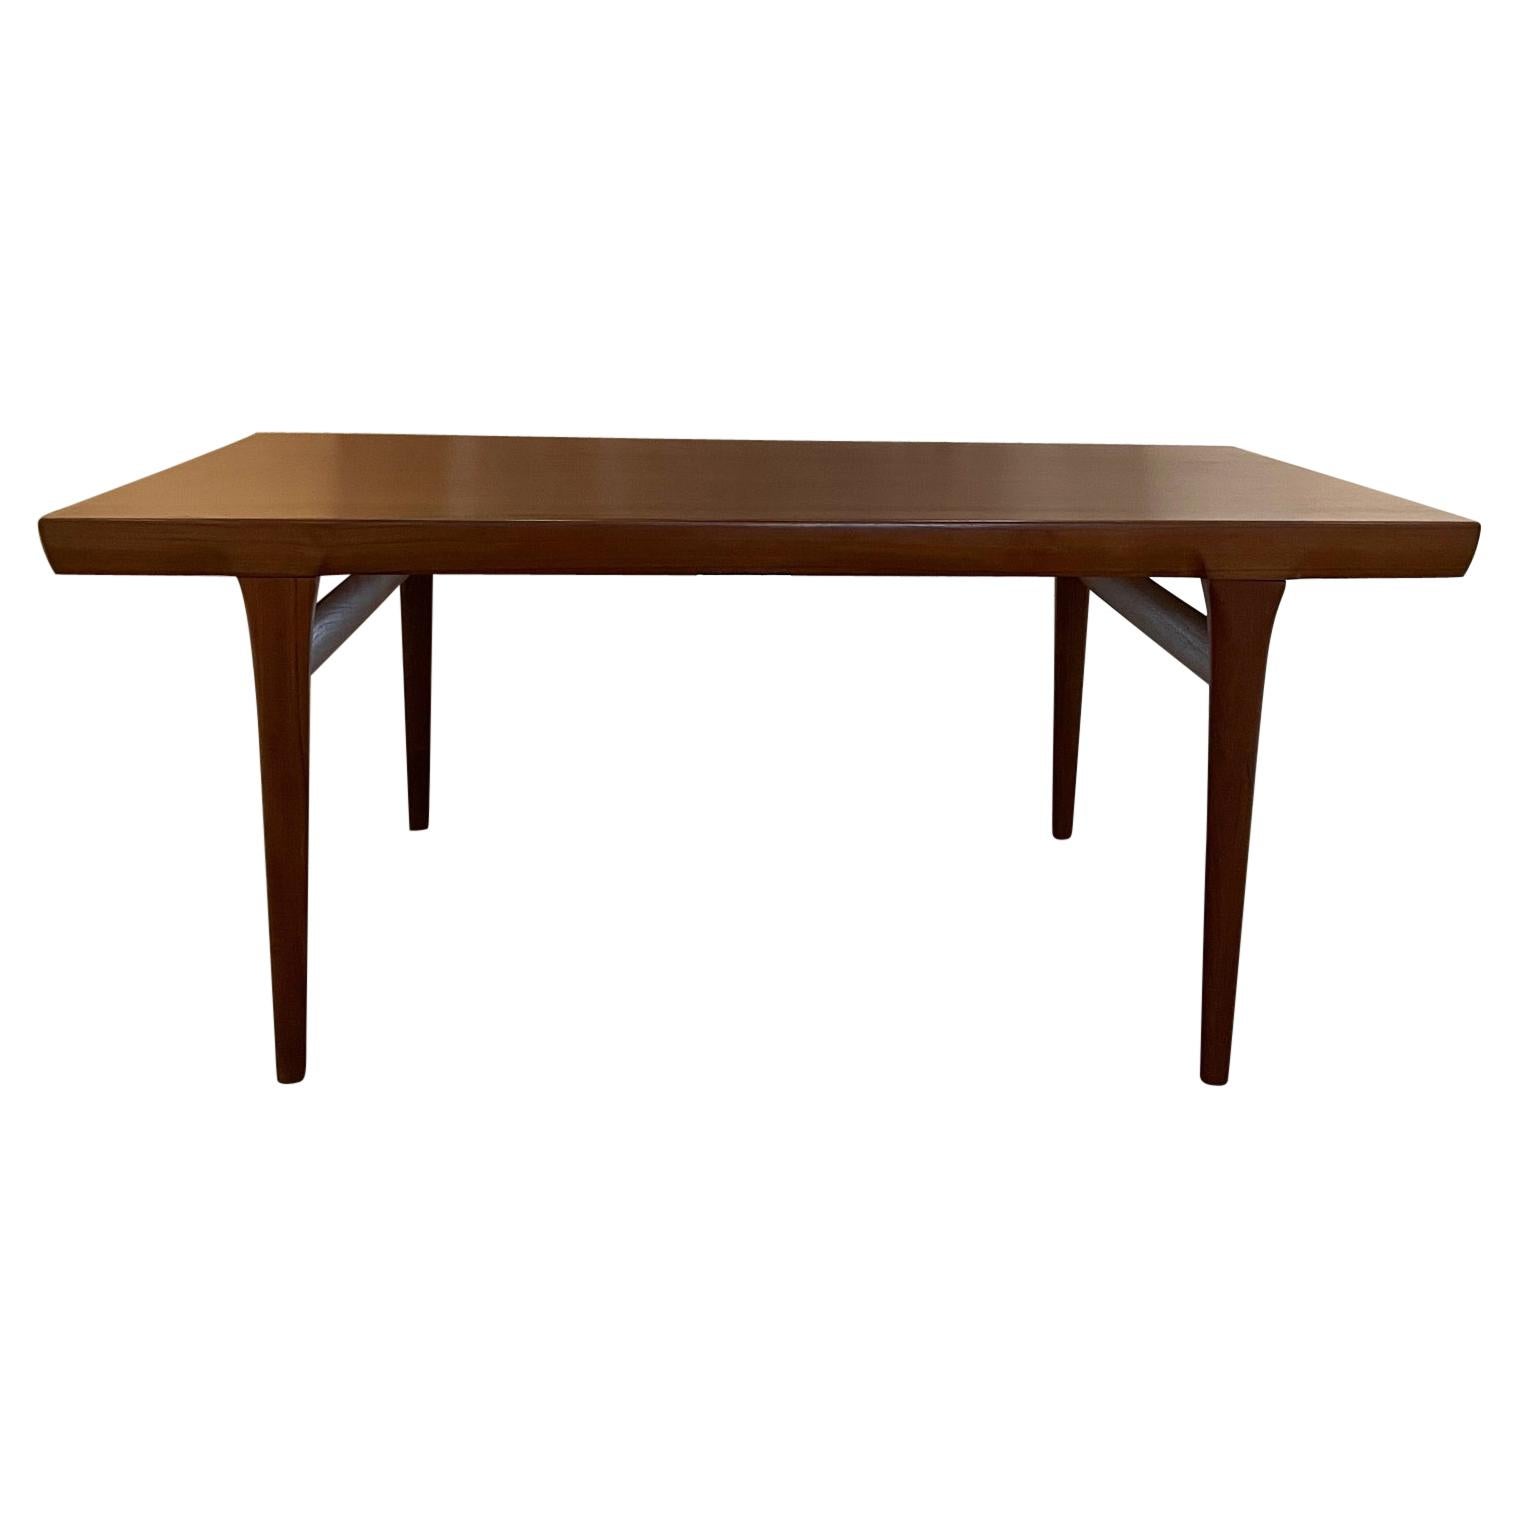 Sleek Scandinavian modern solid teak dining table made in Denmark 1960s
Teak extension dining table designed by Ib Kofod-Larsen for Faarup Møbelfabrik.
Superior craftsmanship with added functionality in the form of two cleverly concealed leaves.
The